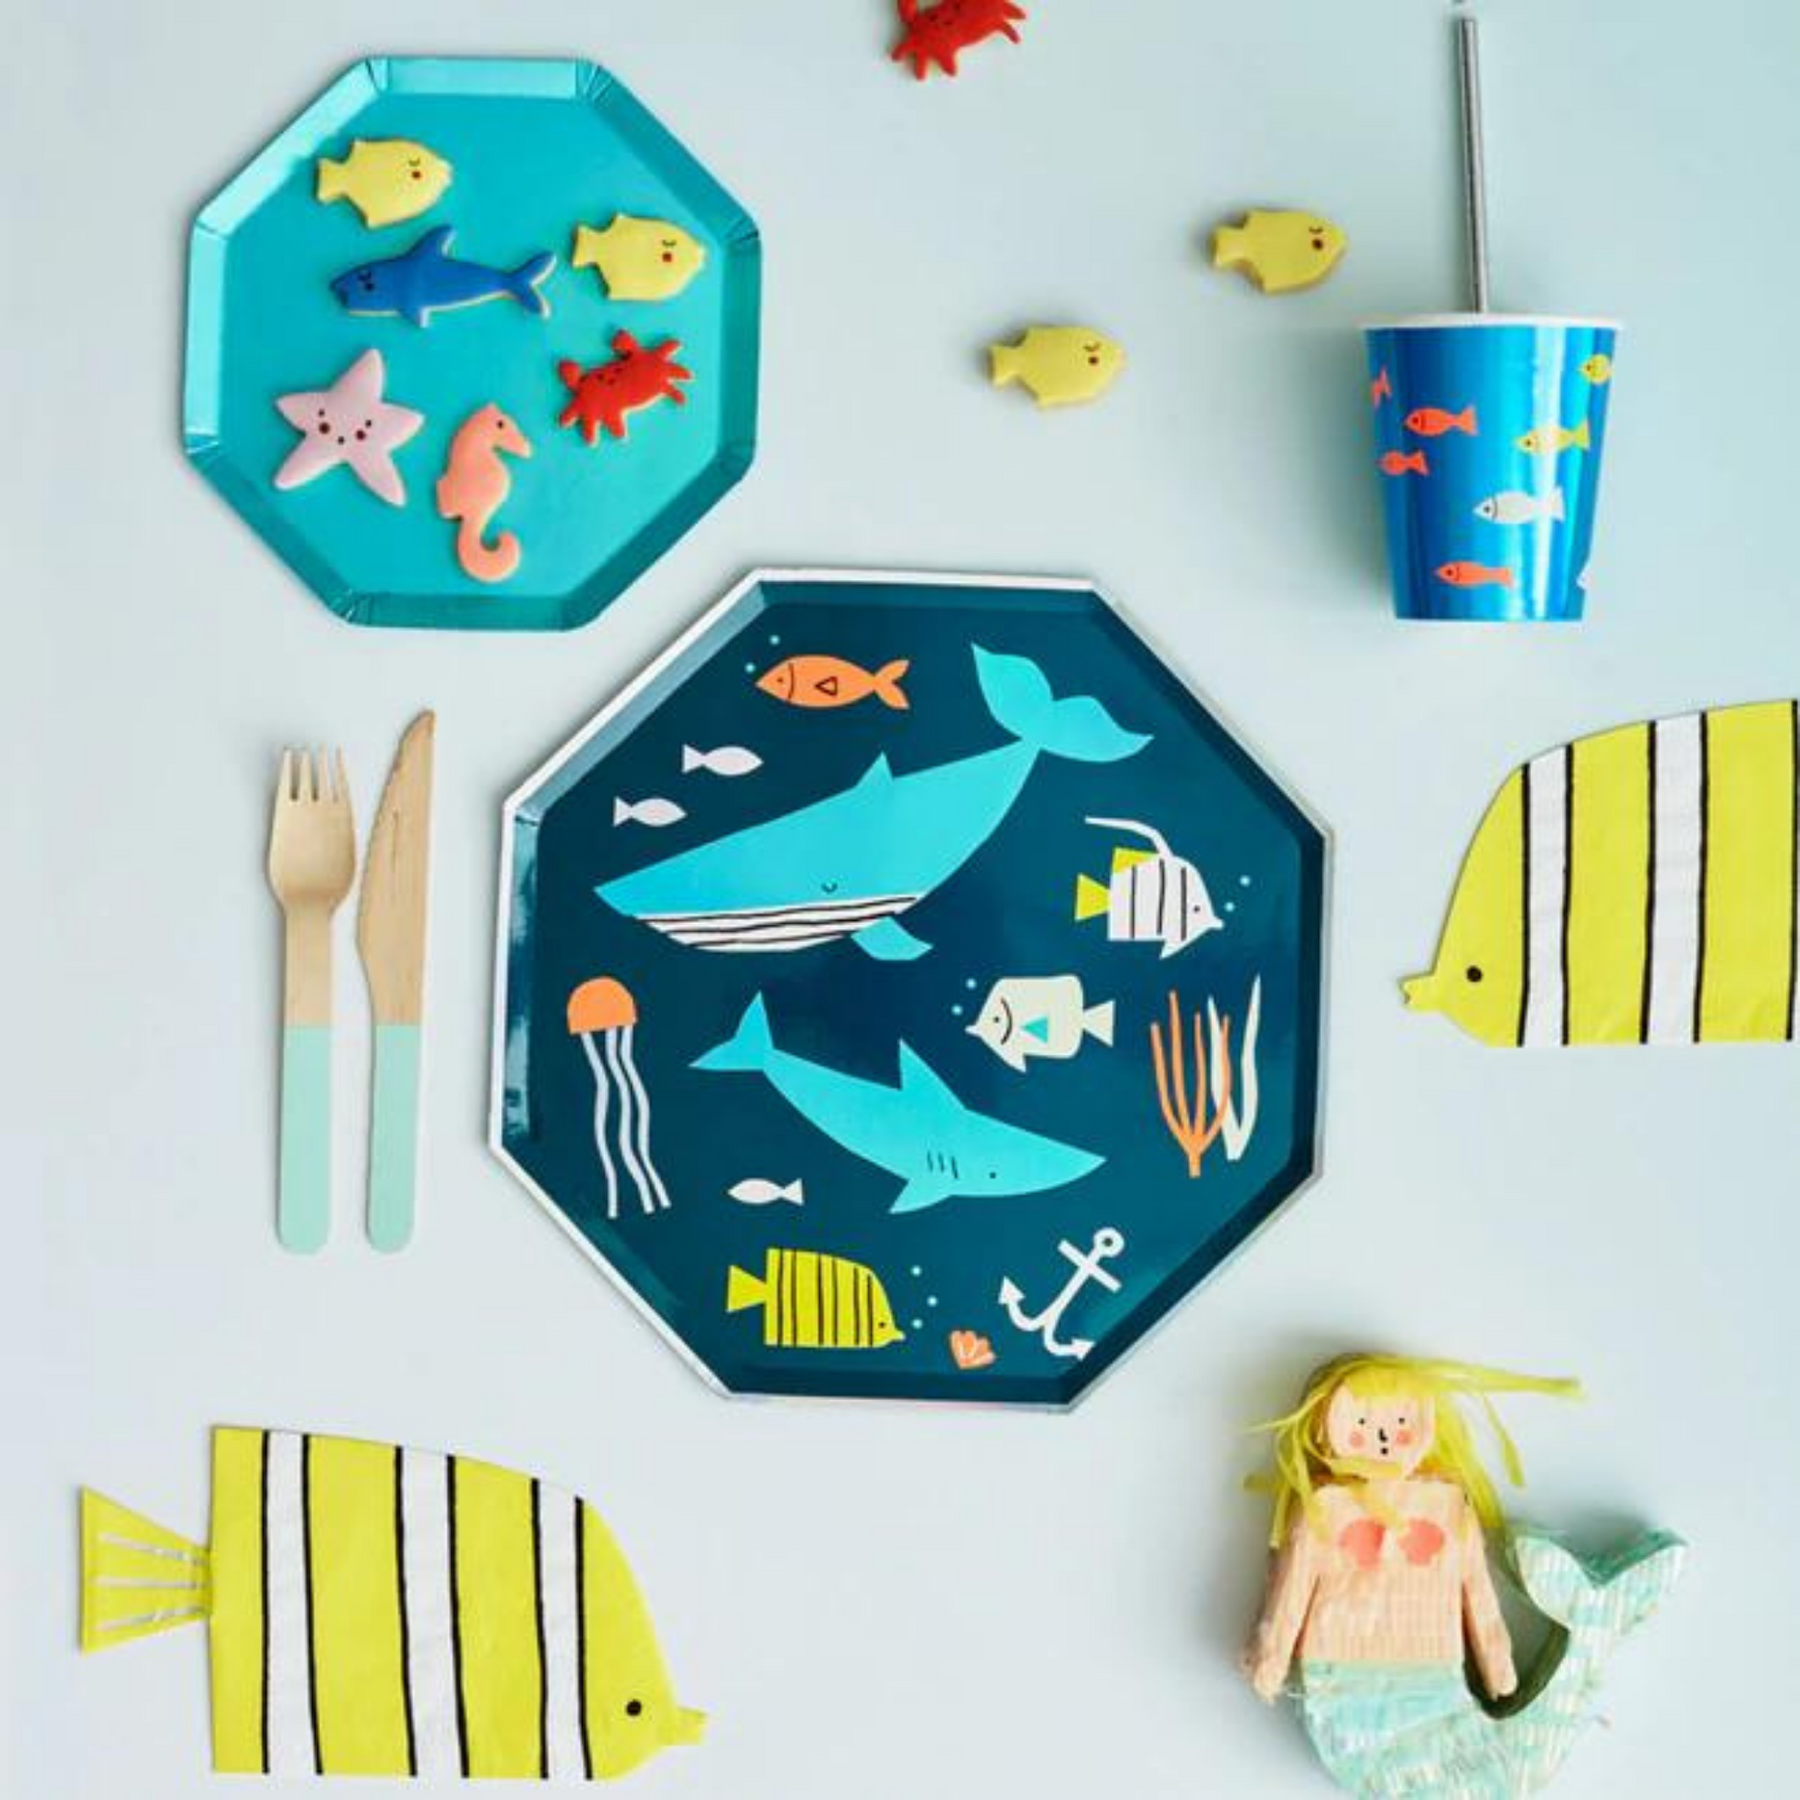 Under The Sea Large Plates